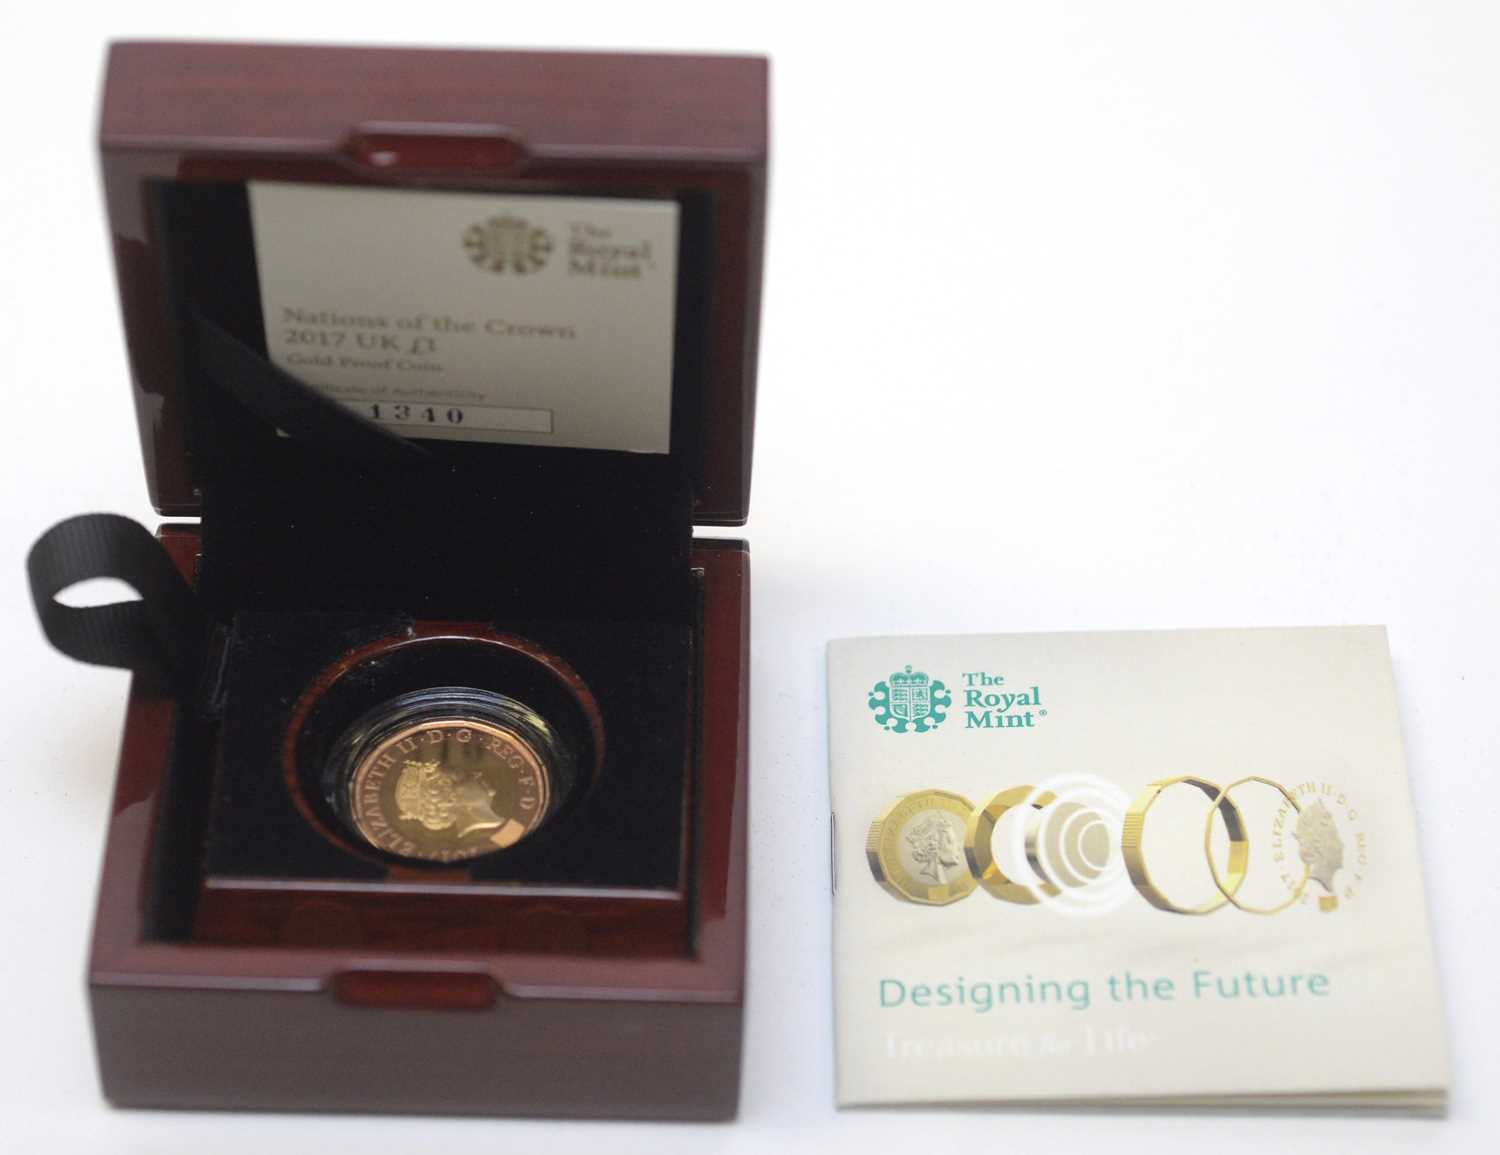 Nations of the Crown £1 gold proof coin